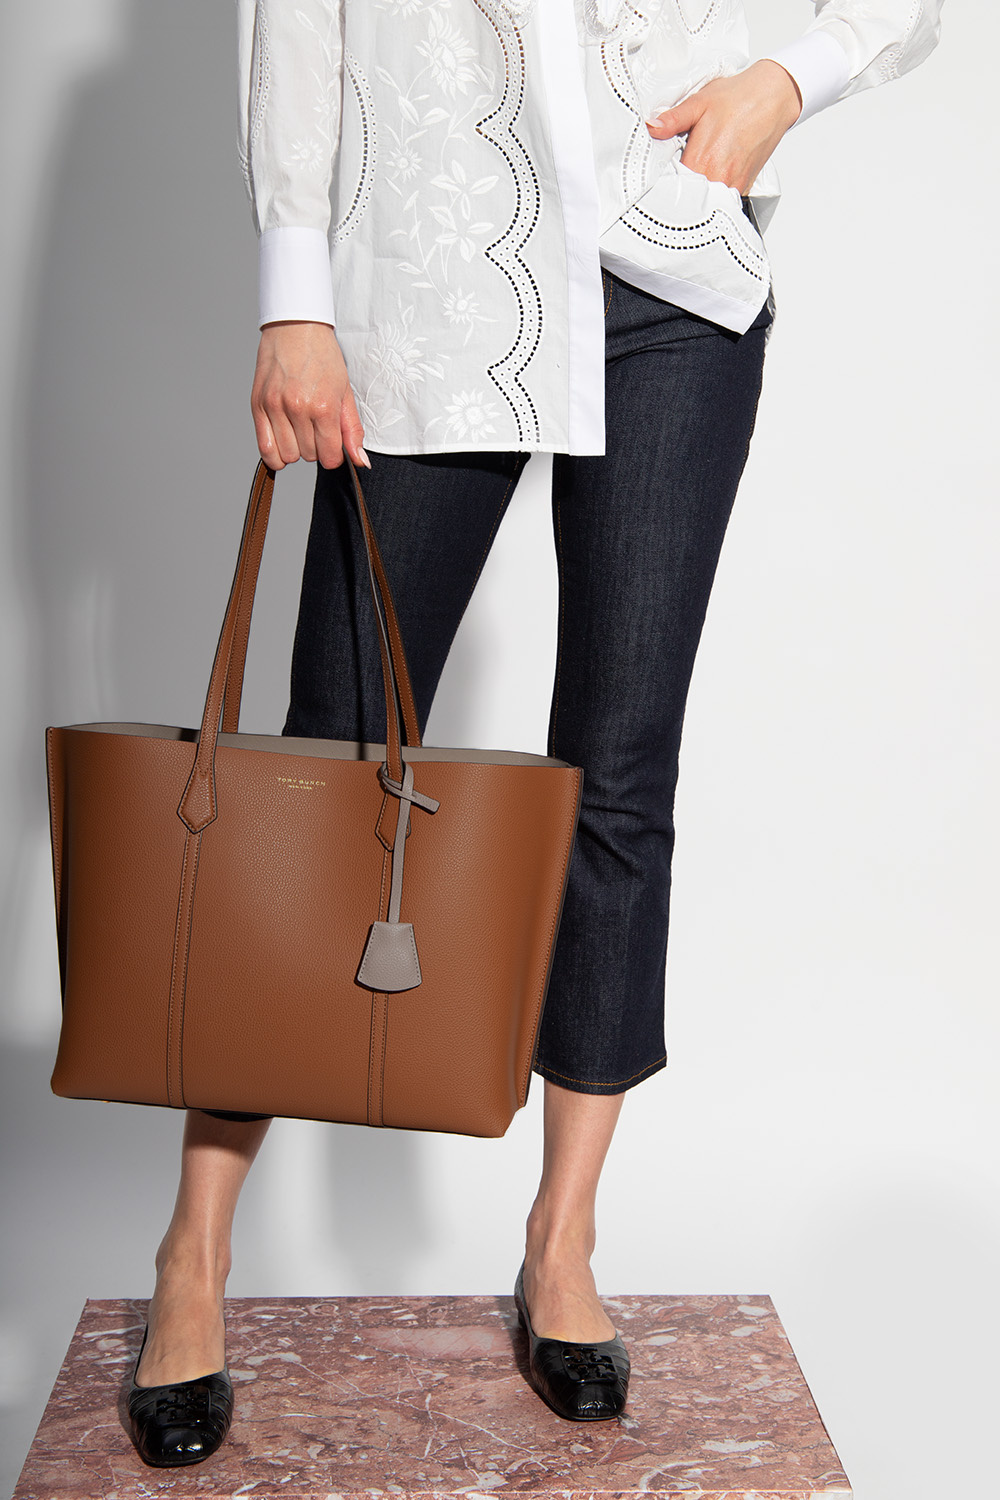 Tory Burch Brown Leather Triple Compartment Perry Tote Tory Burch